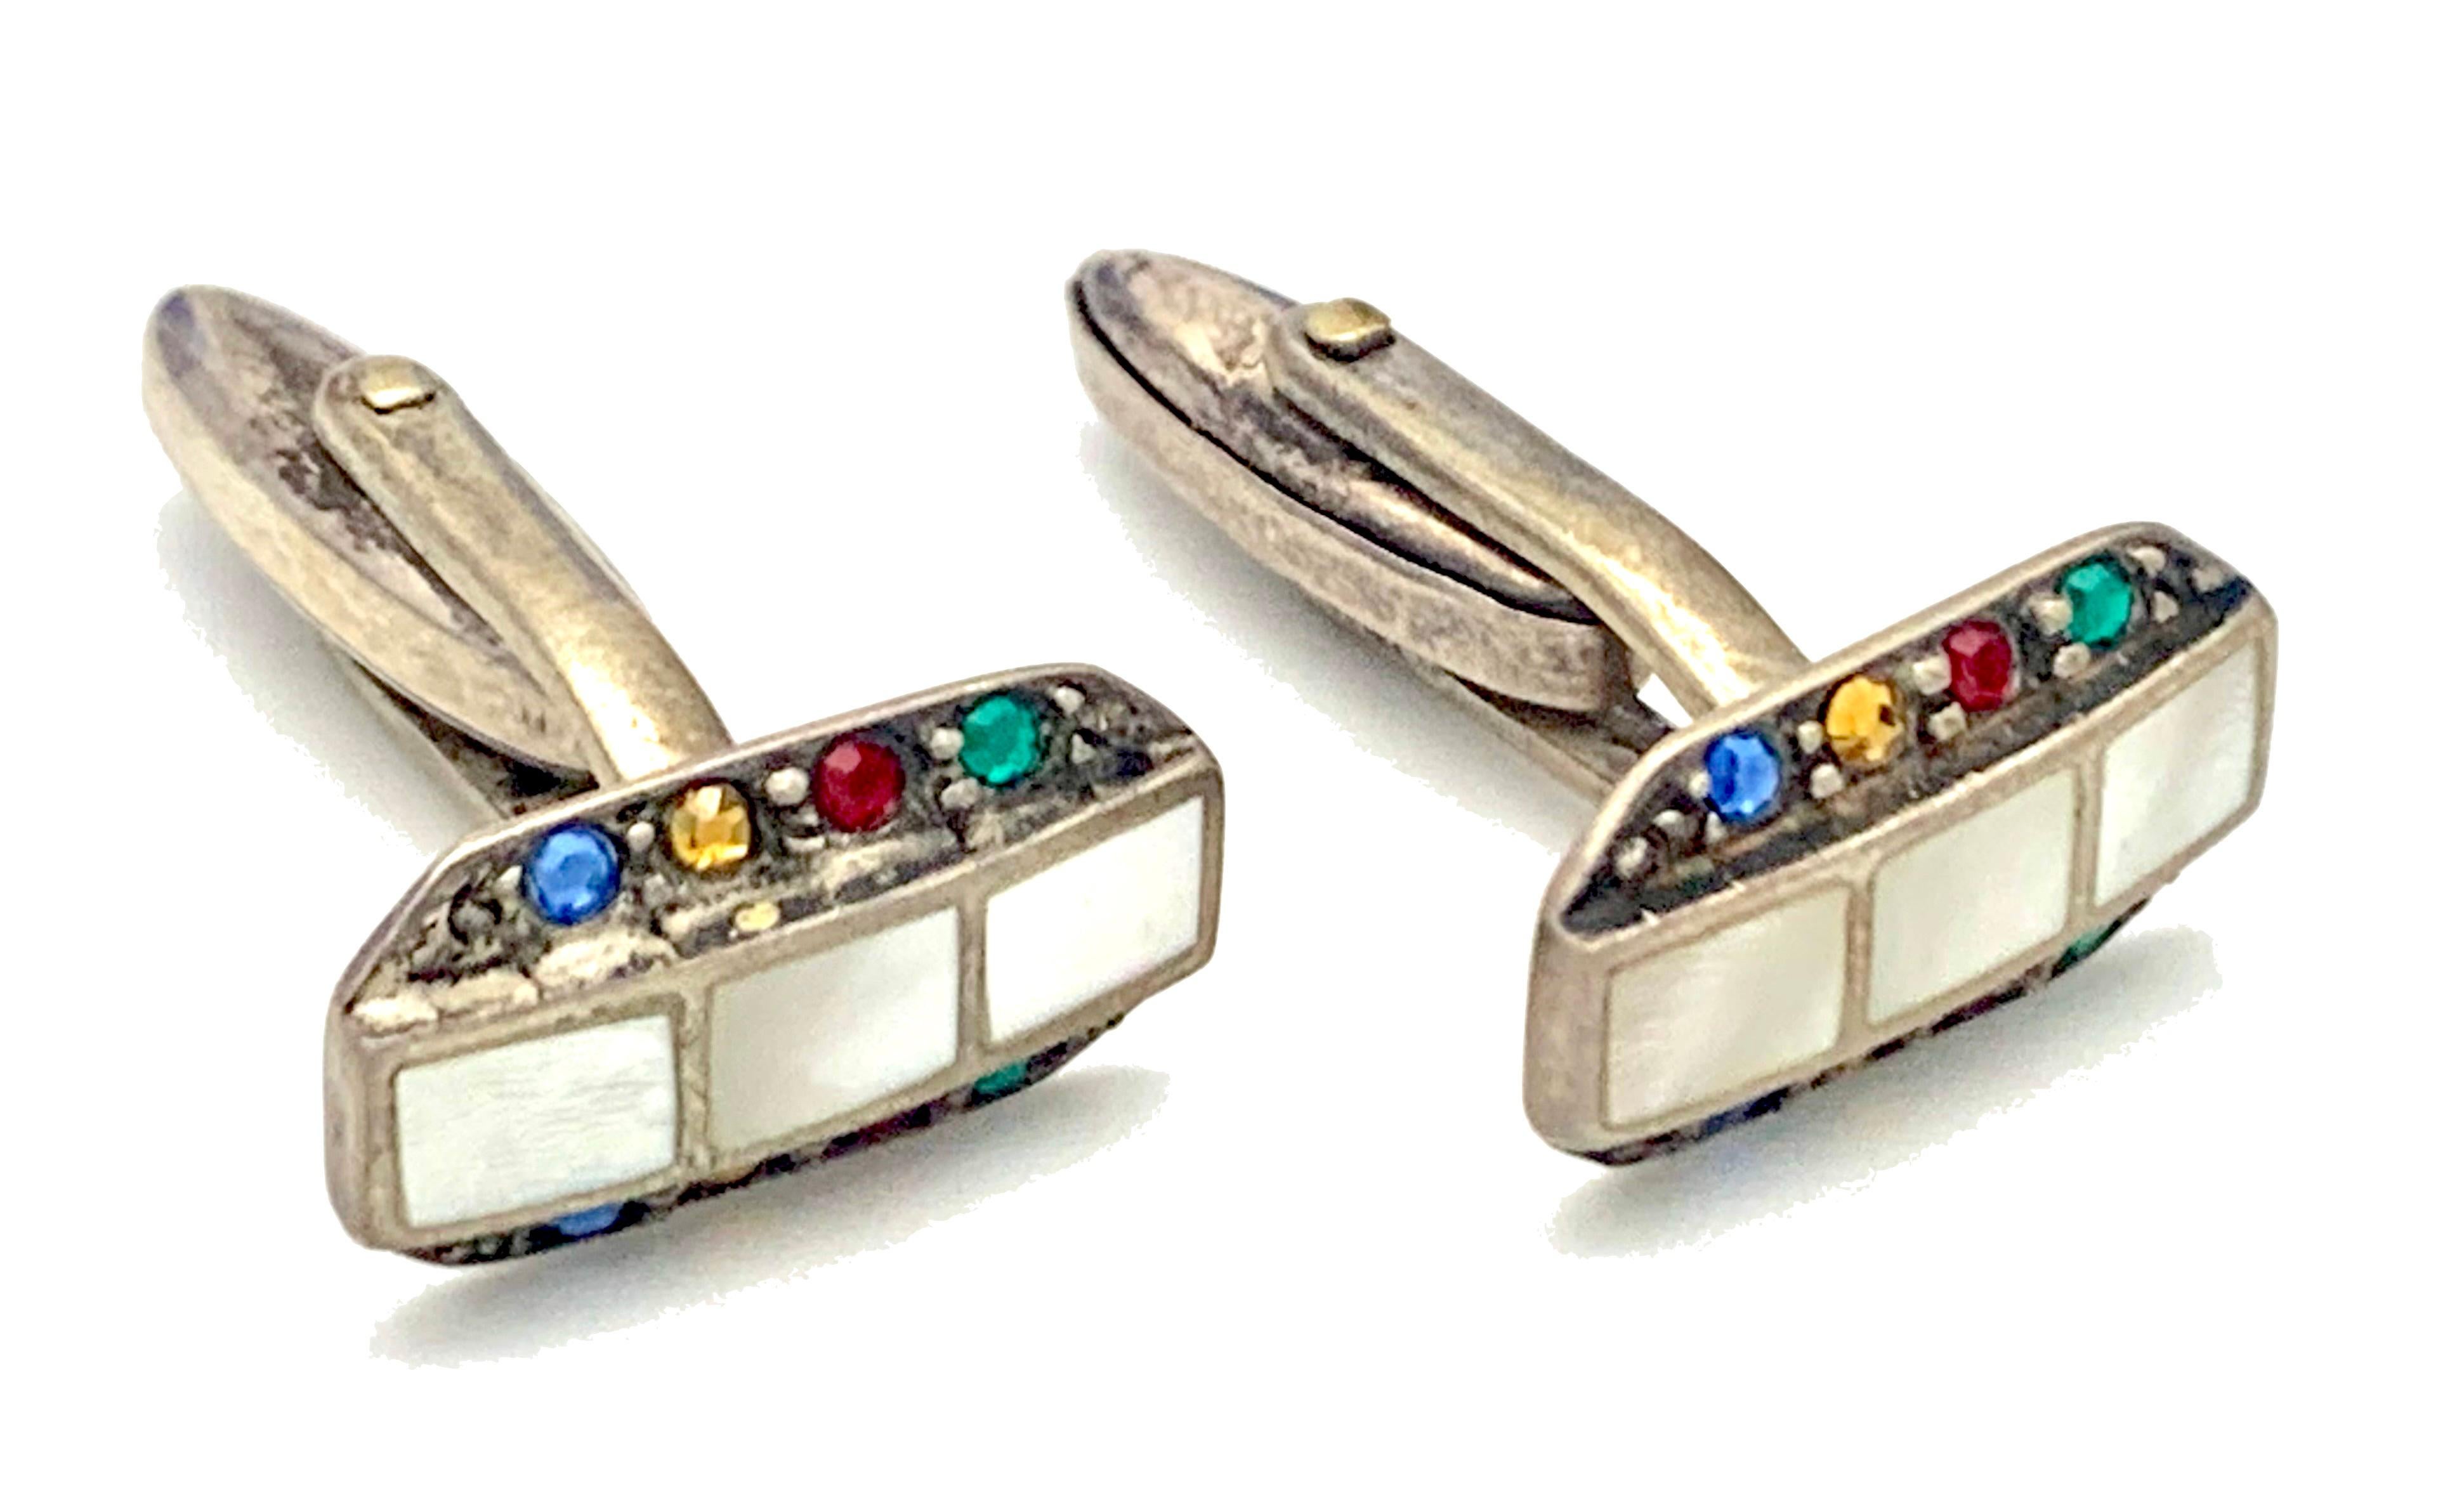 These charming colourful octagonal cufflinks embody the spirit of At Deco, stylishness, strong design, bright lights, a fast and colourful live, the roaring twenties. Geometric design with a playful twist.
In the centre of each cufflink  three